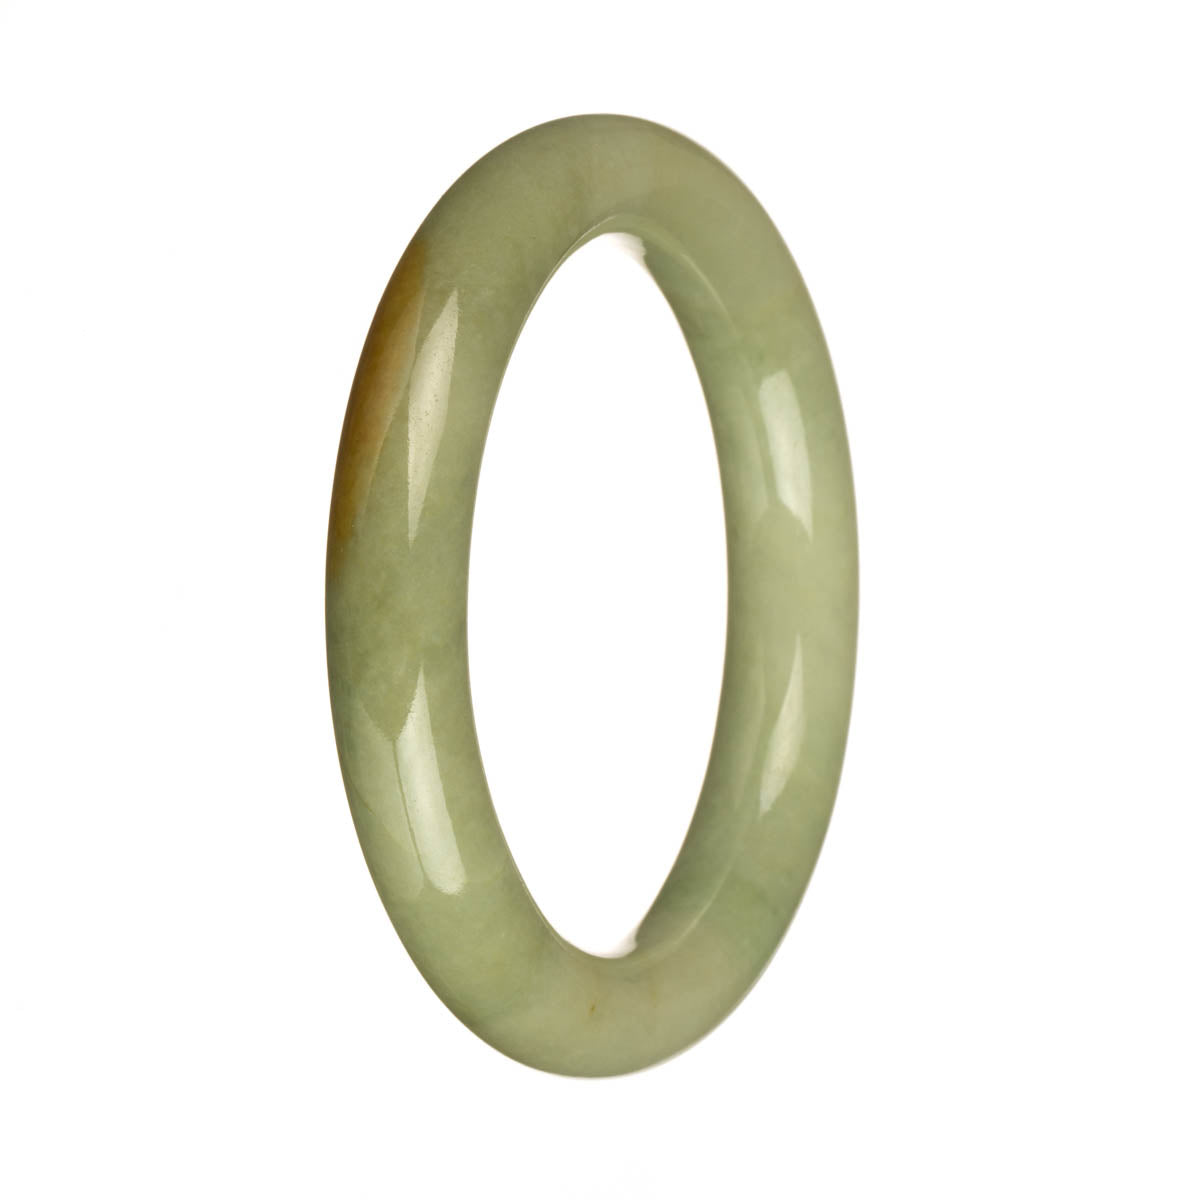 56mm Green with Brown Patch Jade Bangle Bracelet